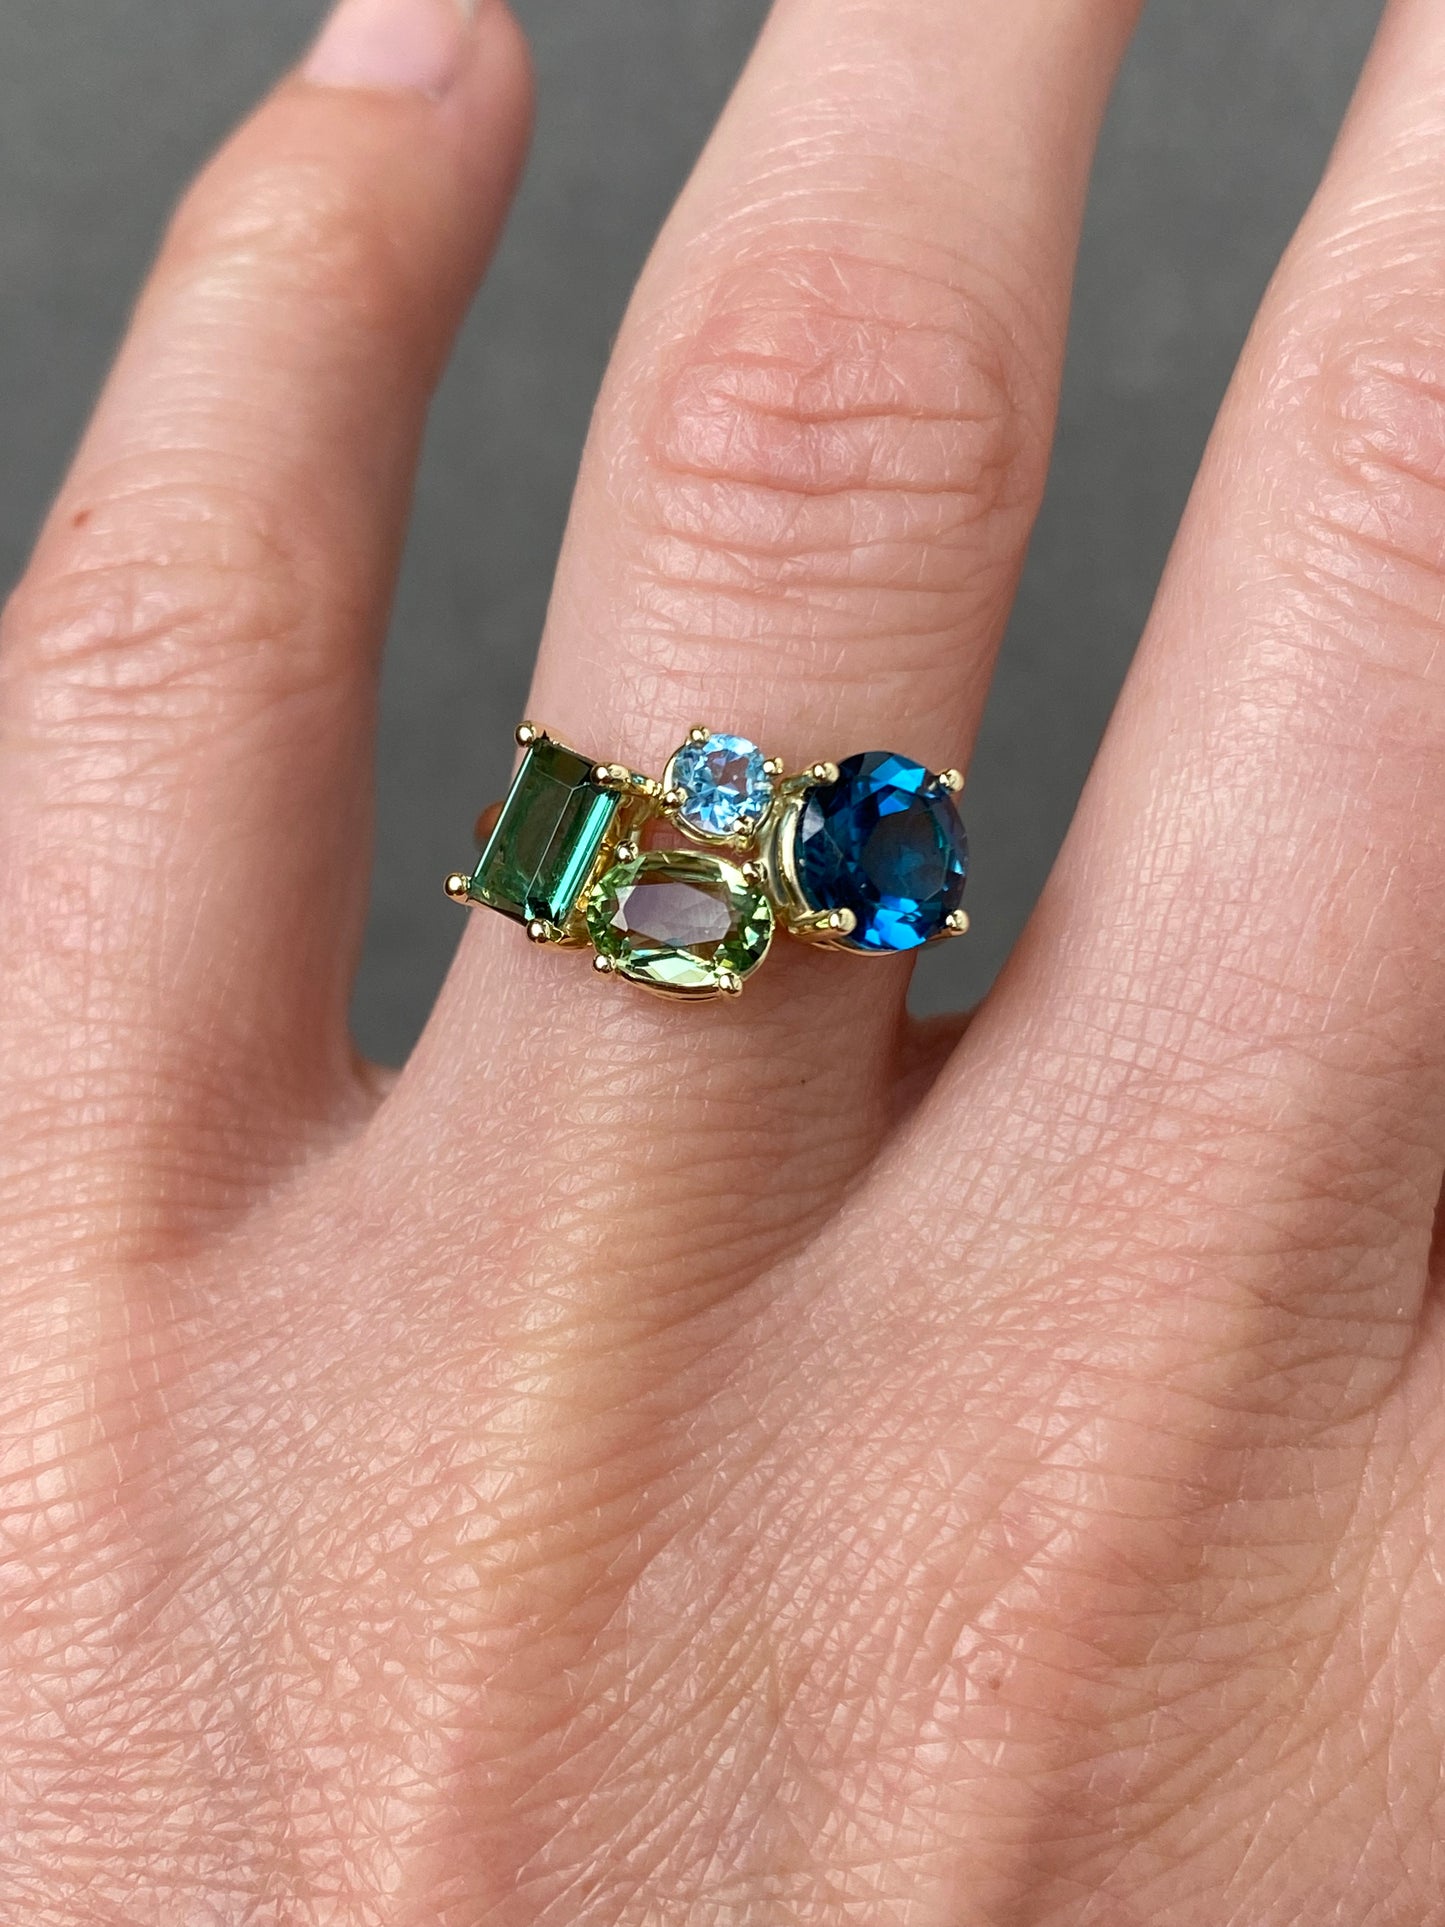 Mosaic ring Tourmaline and  Topaz in 14k yellow gold